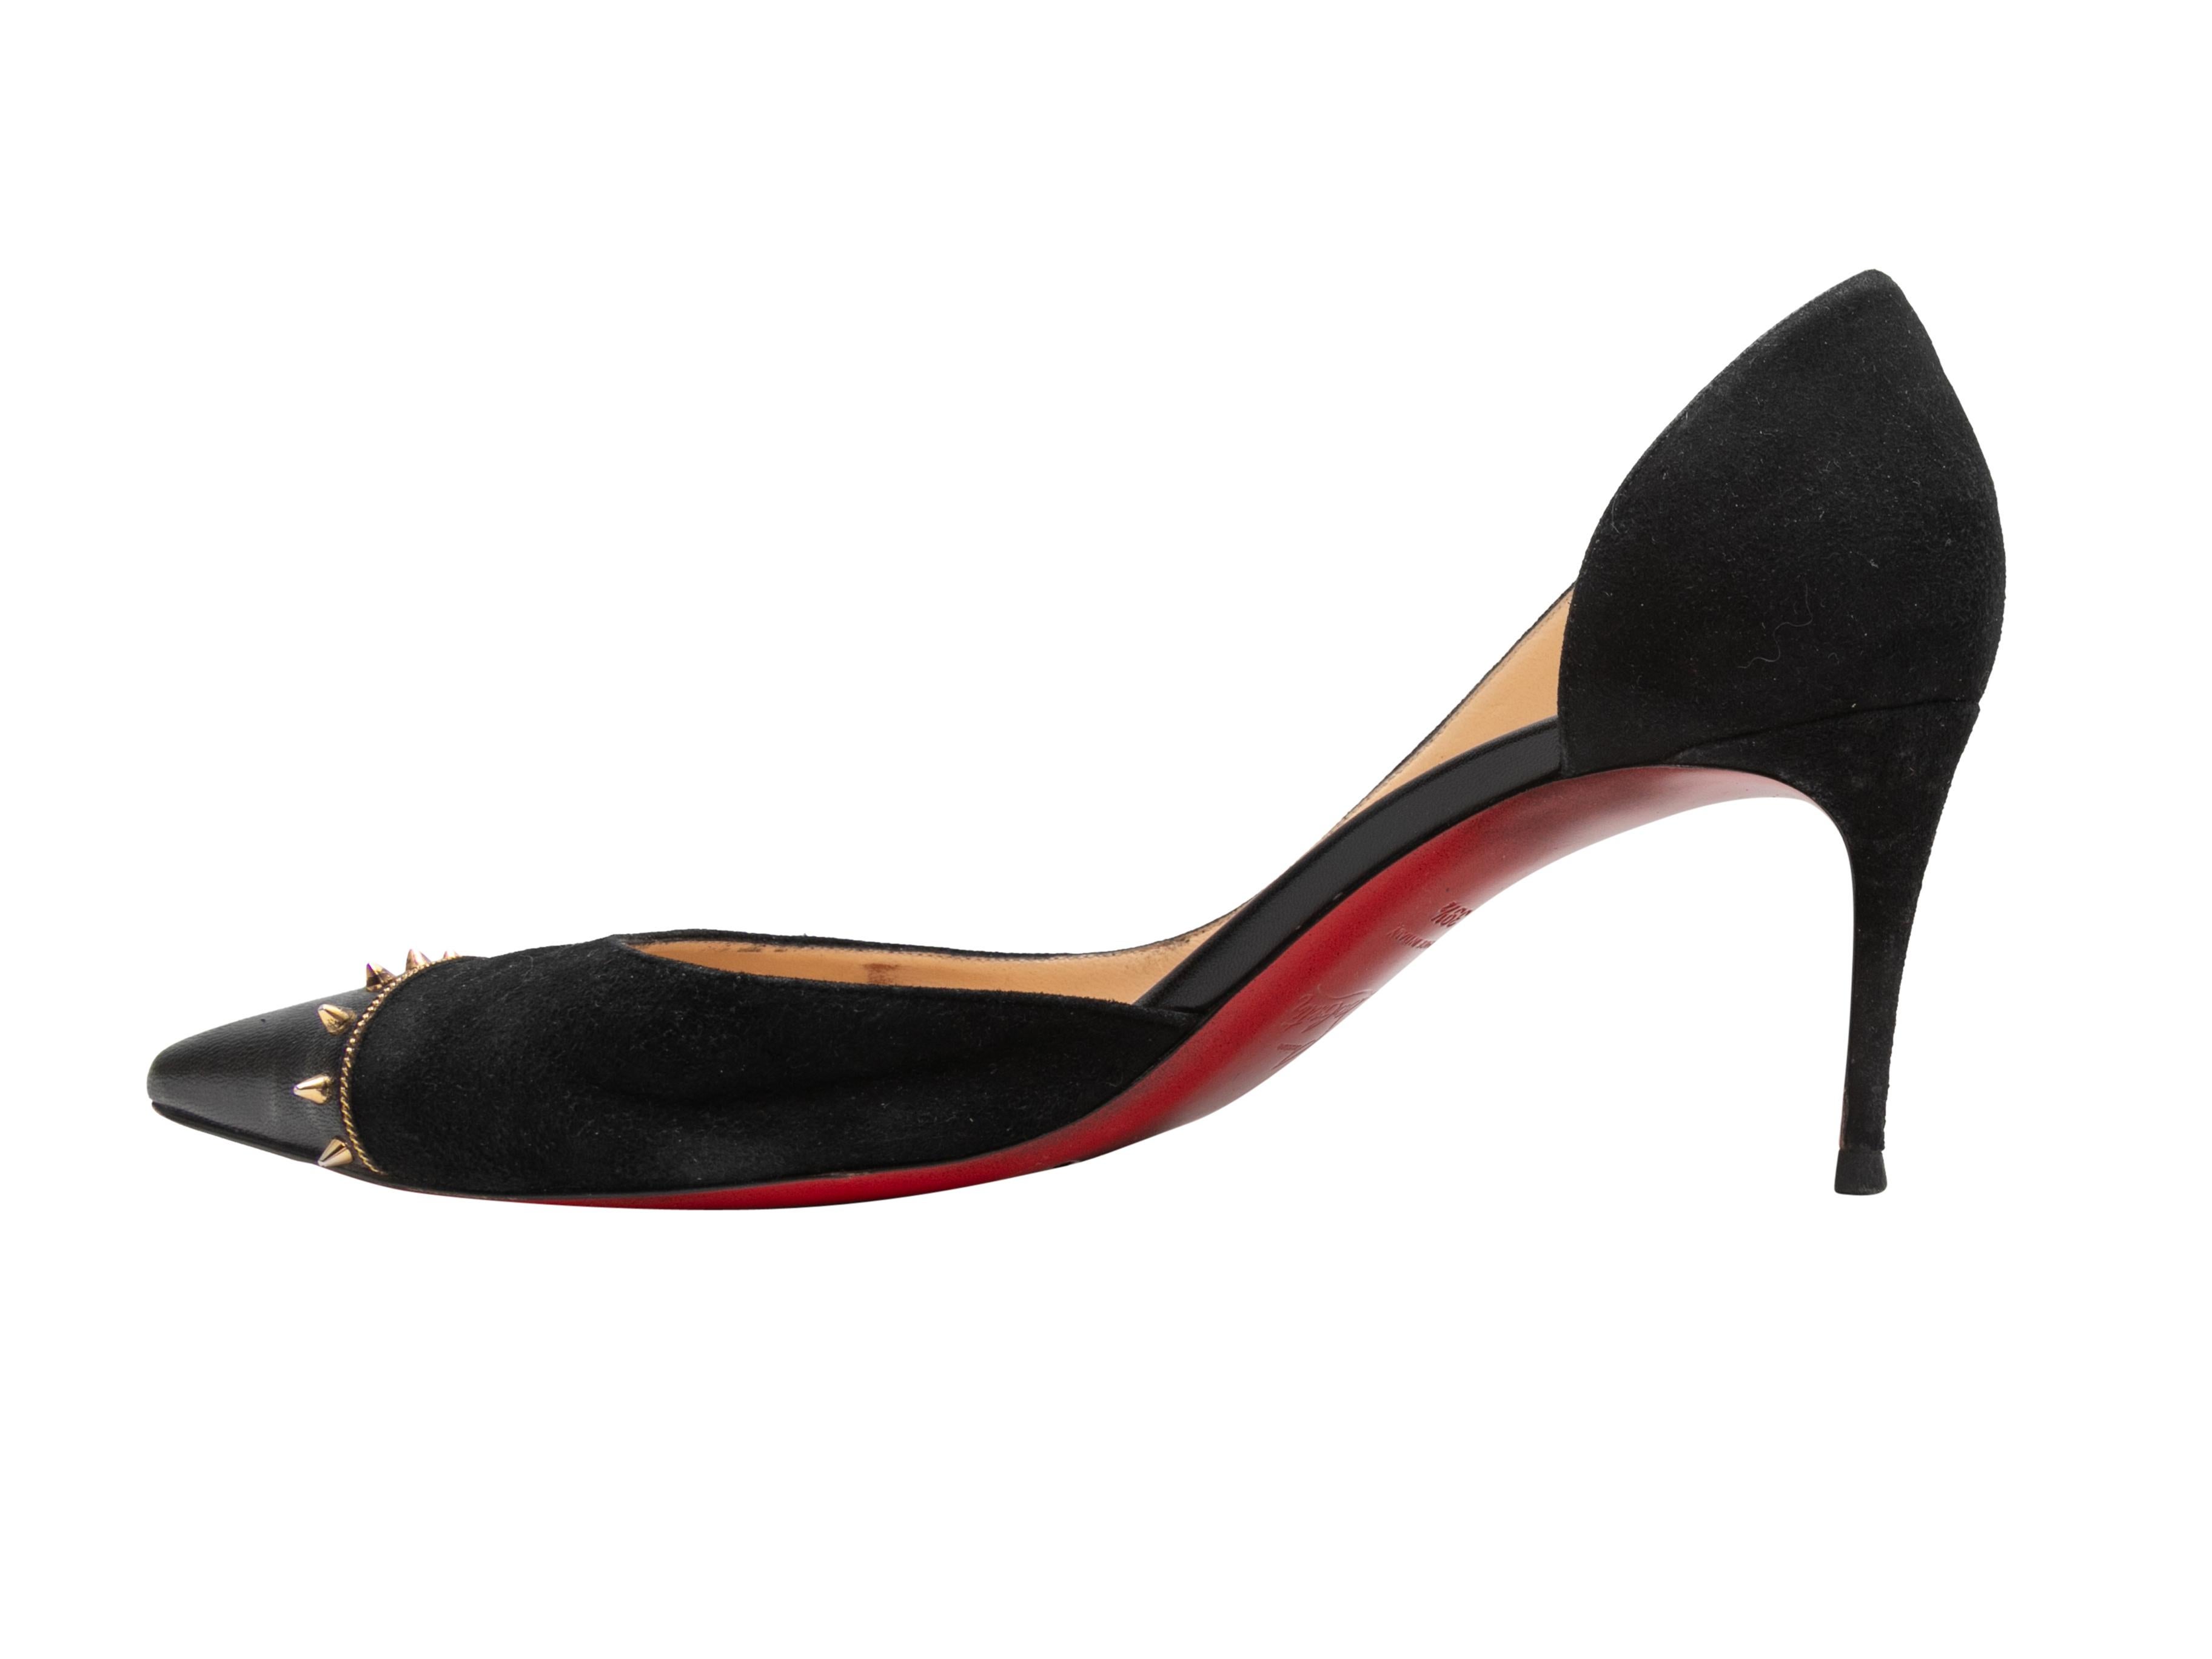 Black suede and leather pointed-toe pumps by Christian Louboutin. Gold-tone conical studs at toes. 2.75